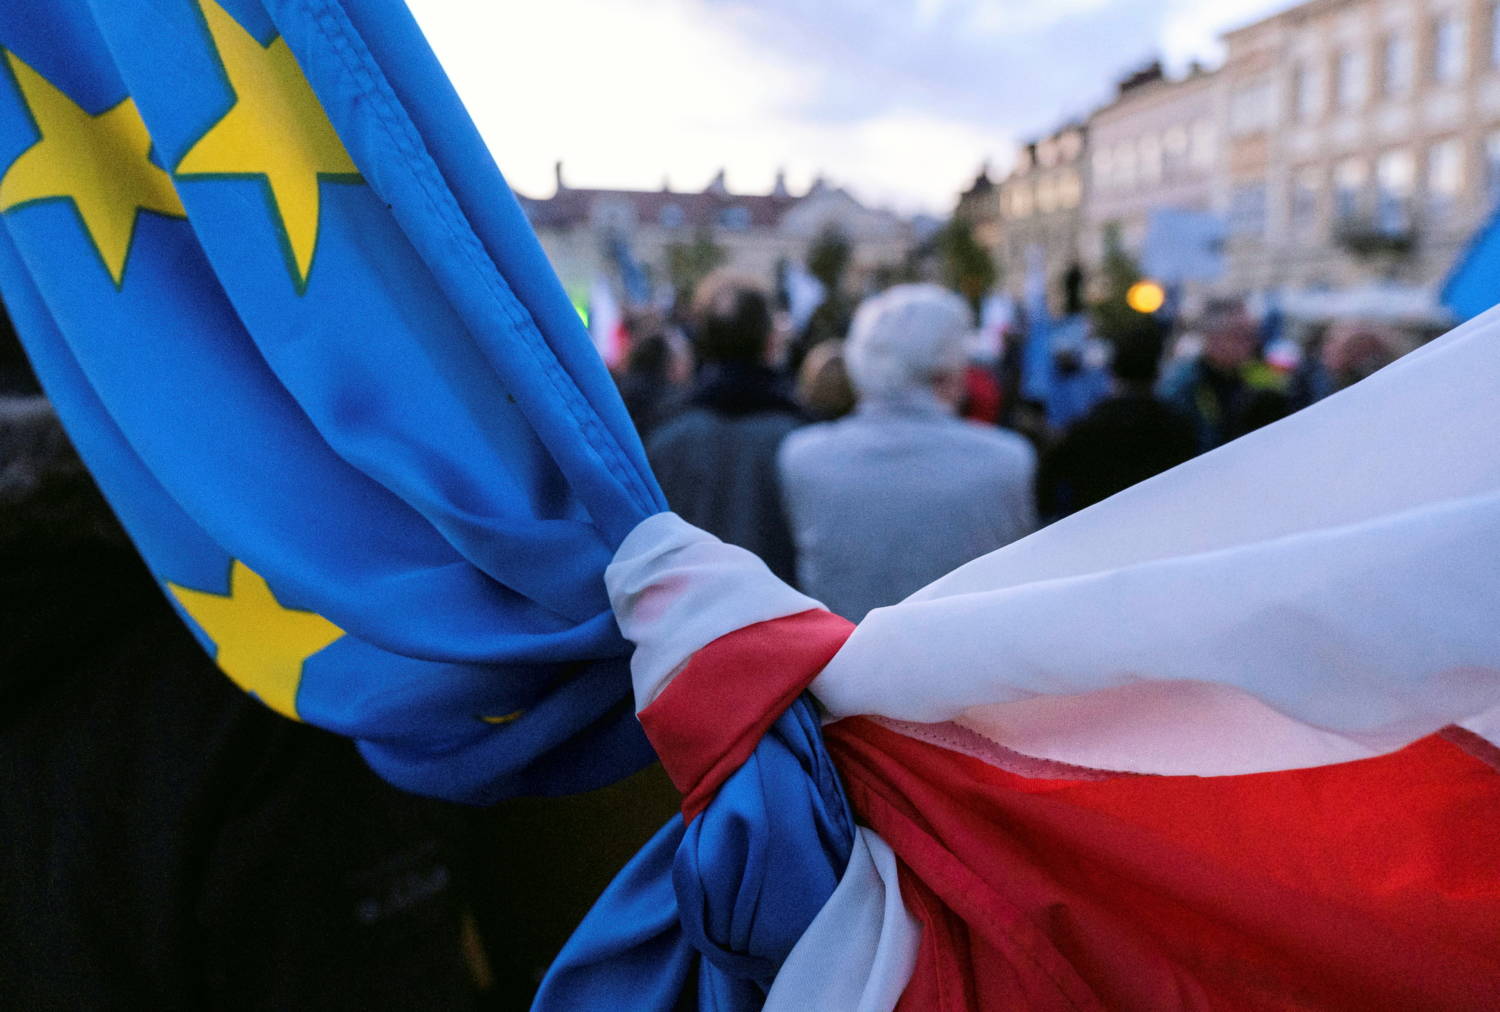 Rally In Support Of Poland's Membership In The European Union, In Rzeszow